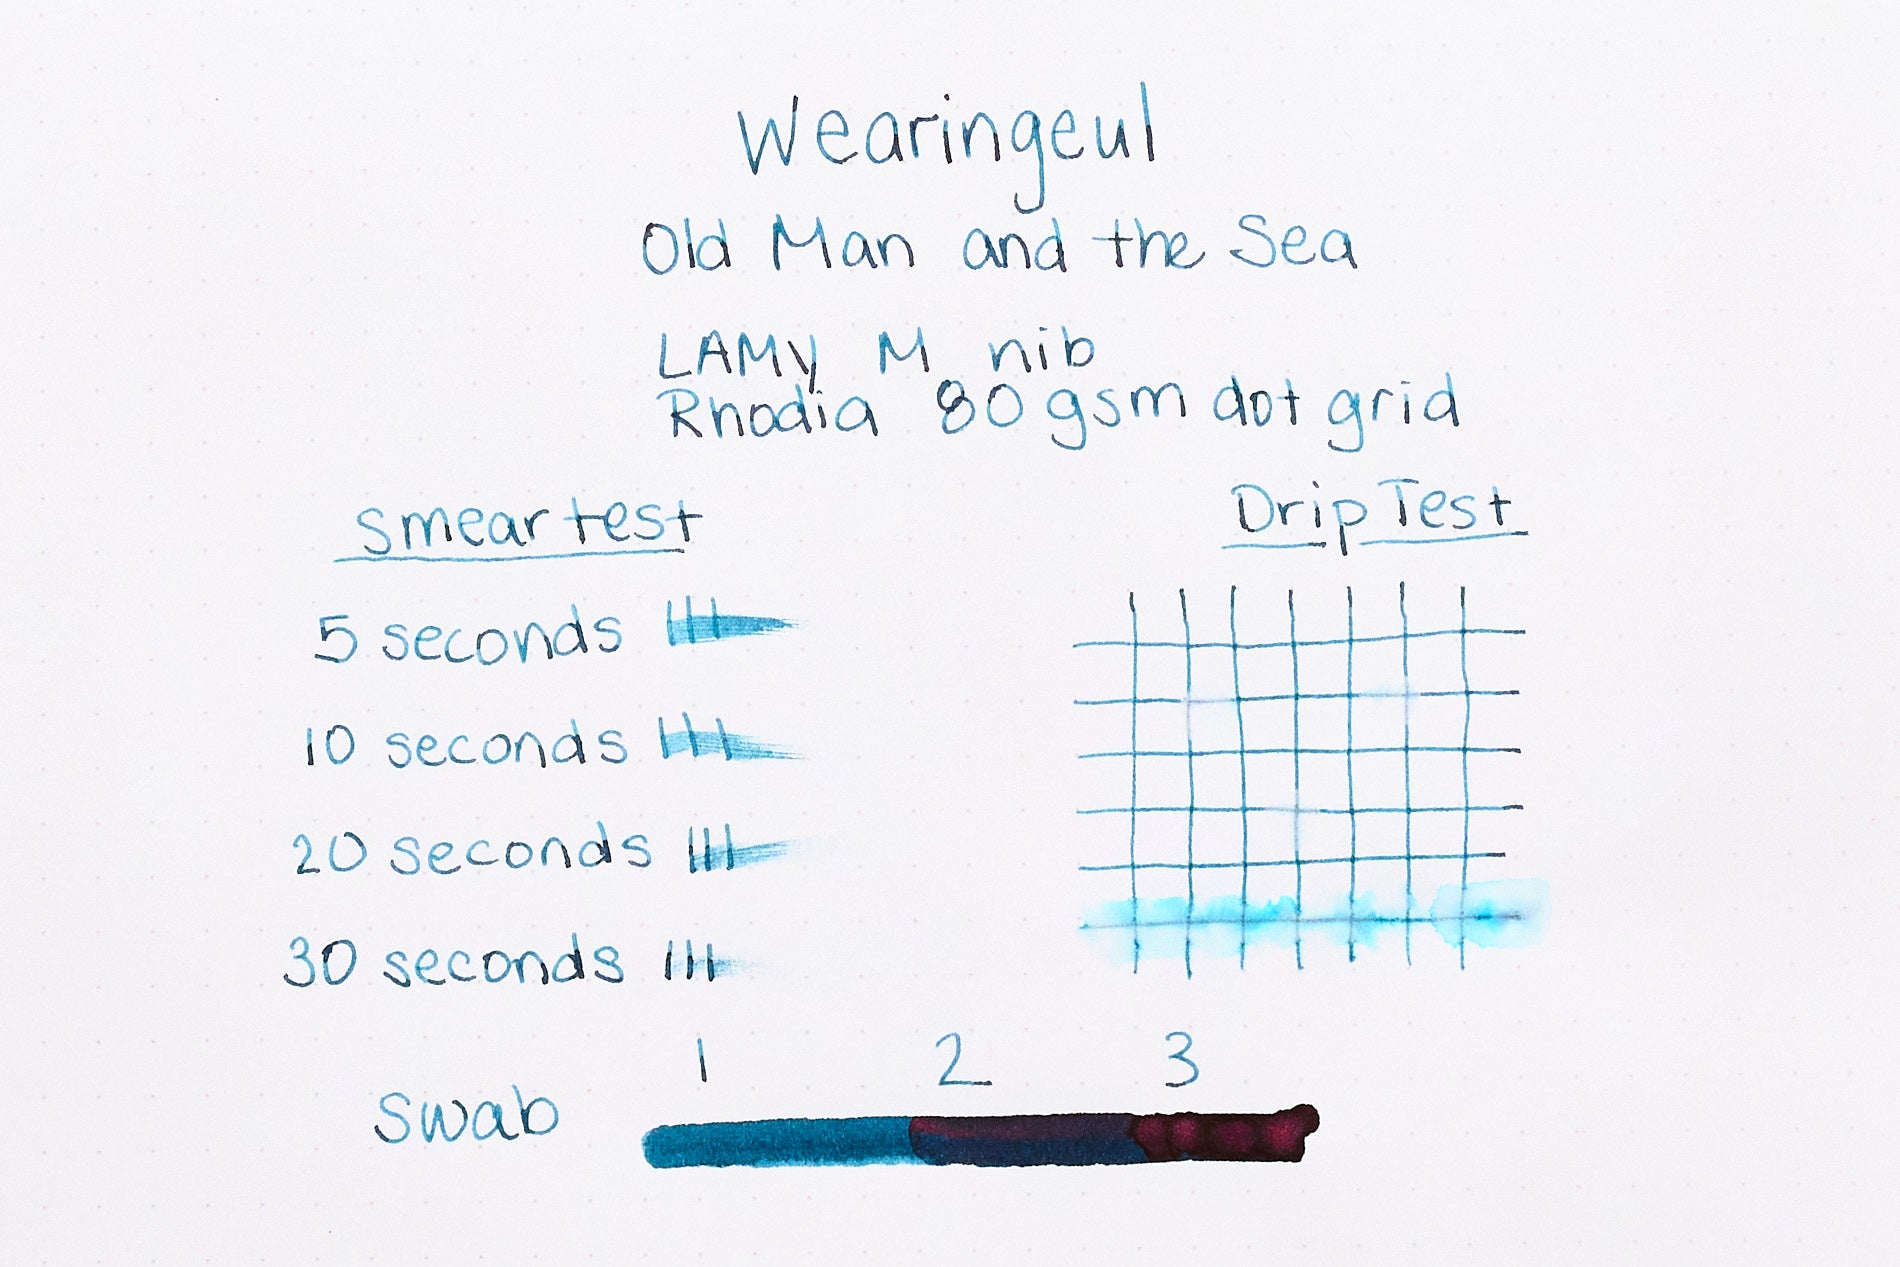 Wearingeul The Old Man and the Sea fountain pen ink writing sample on white dot grid paper